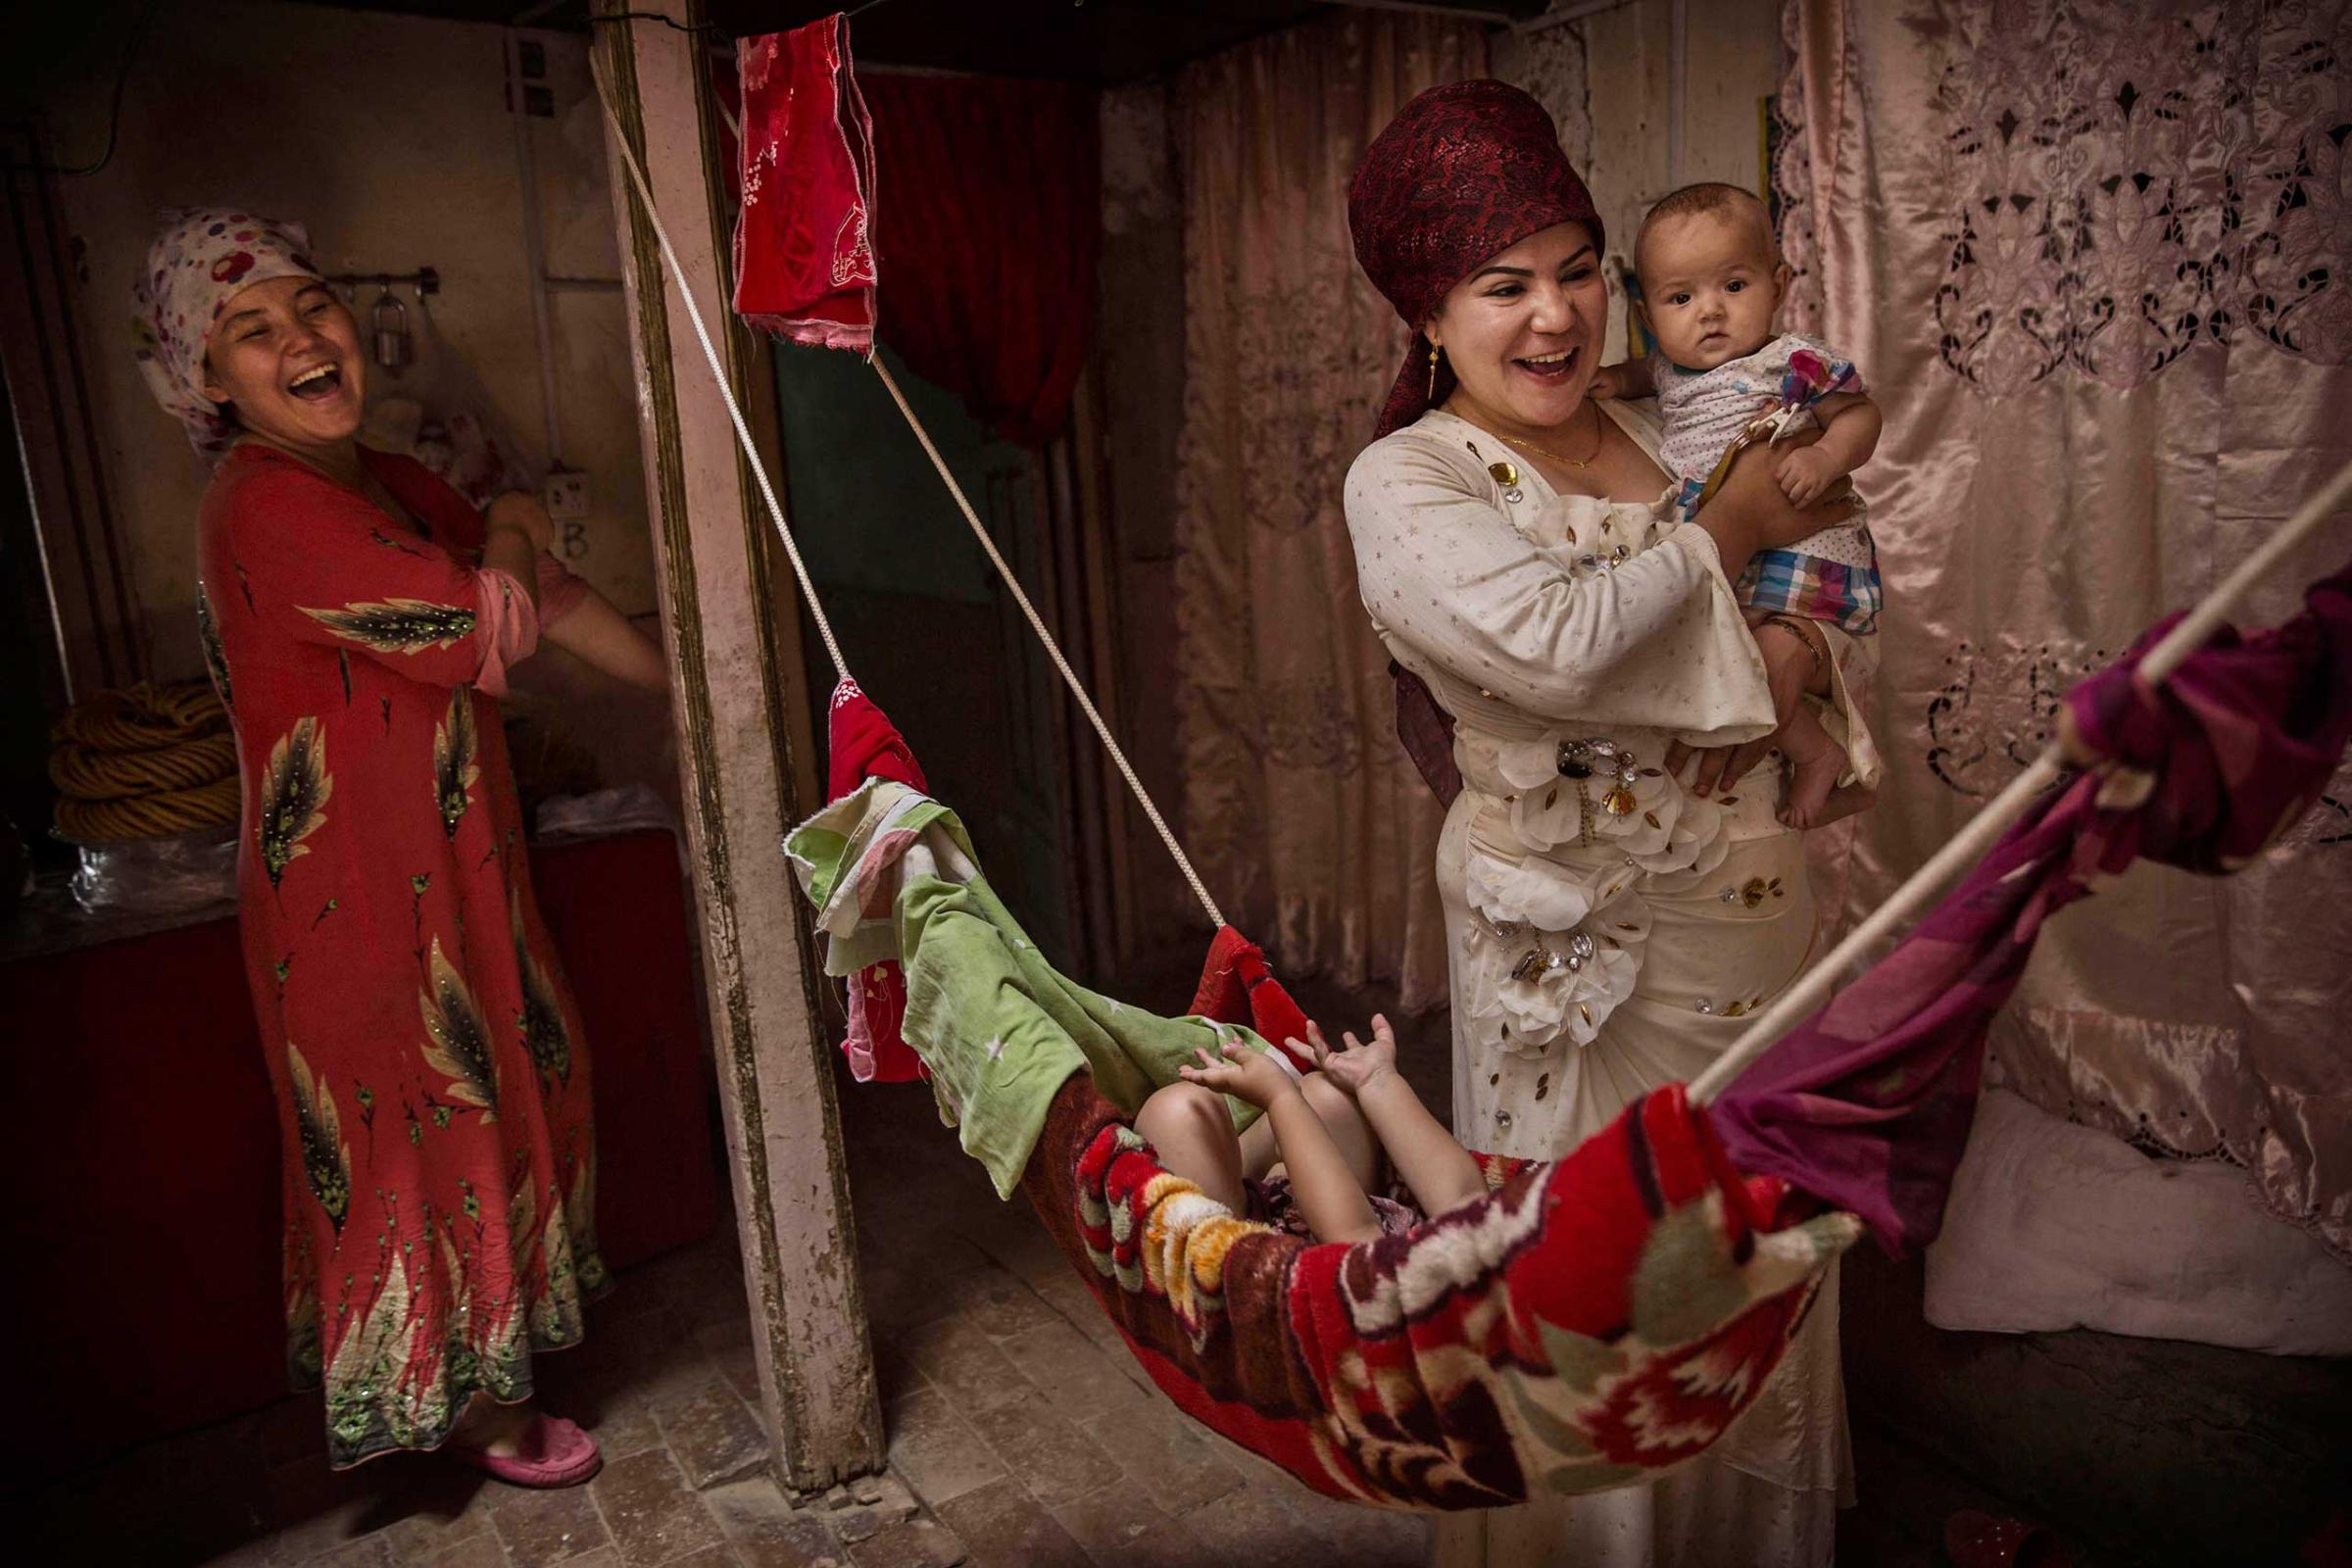 Uighur women laugh as they take care of their children at home before the Eid holiday in old Kashgar, Xinjiang Province, China, July 28, 2014.